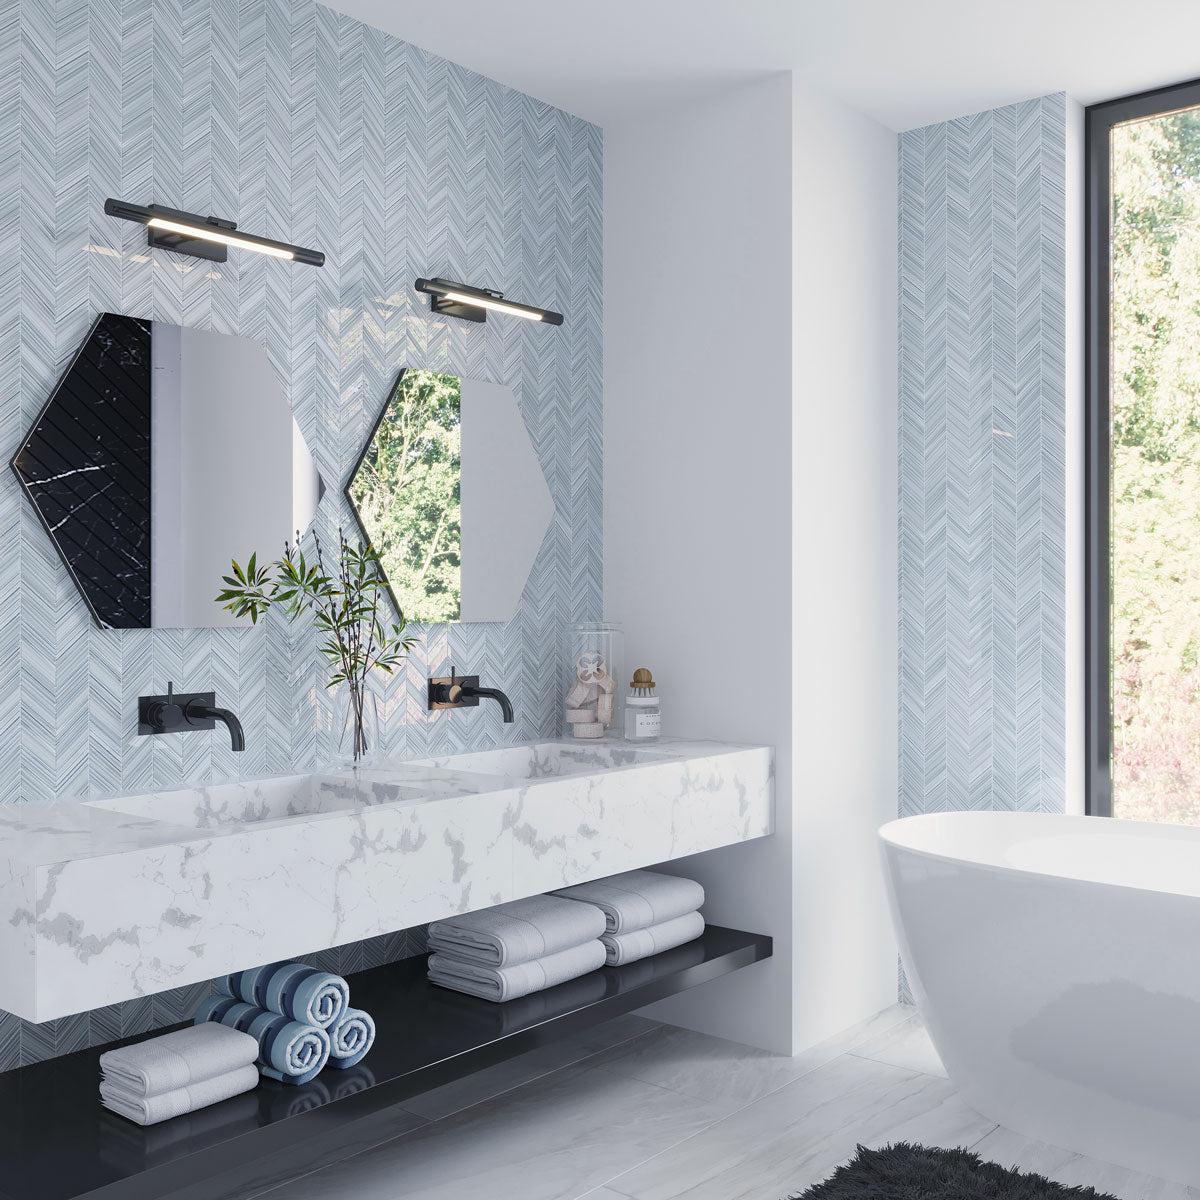 Bathroom Wall with Fabrique Blue Grey Chevron Glass Mosaic Tile Behind the Floating Vanity